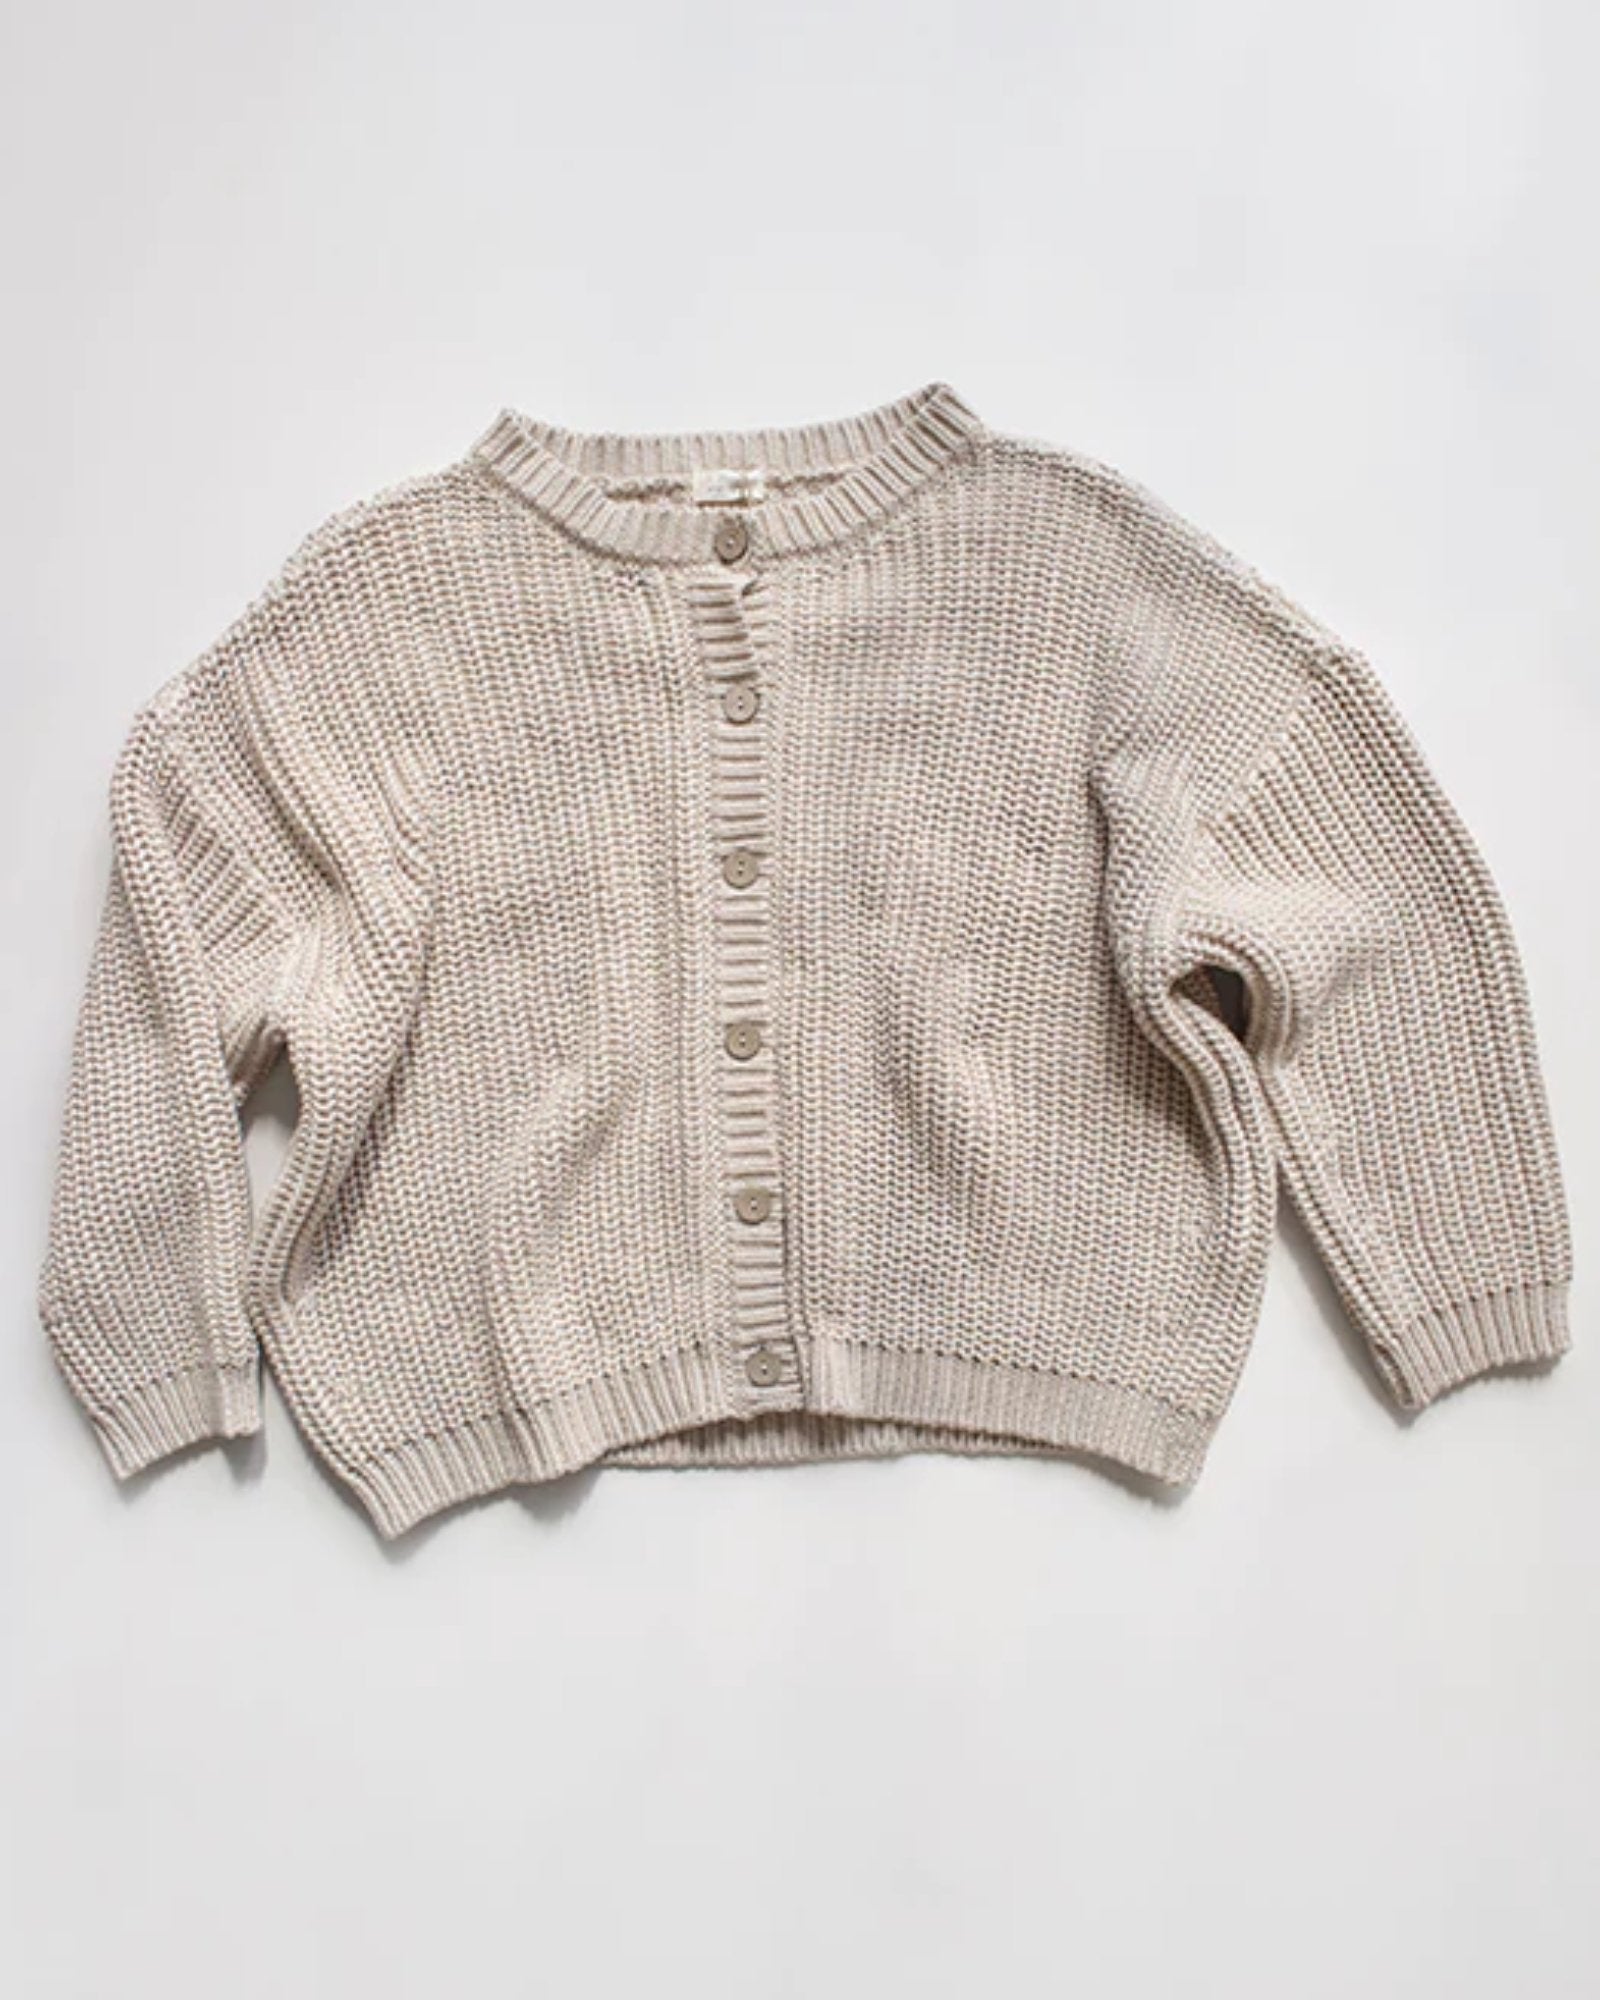 The Chunky Cardigan by The Simple Folk - OAT & OCHRE | Slow Fashion, Organic, Ethically-Made